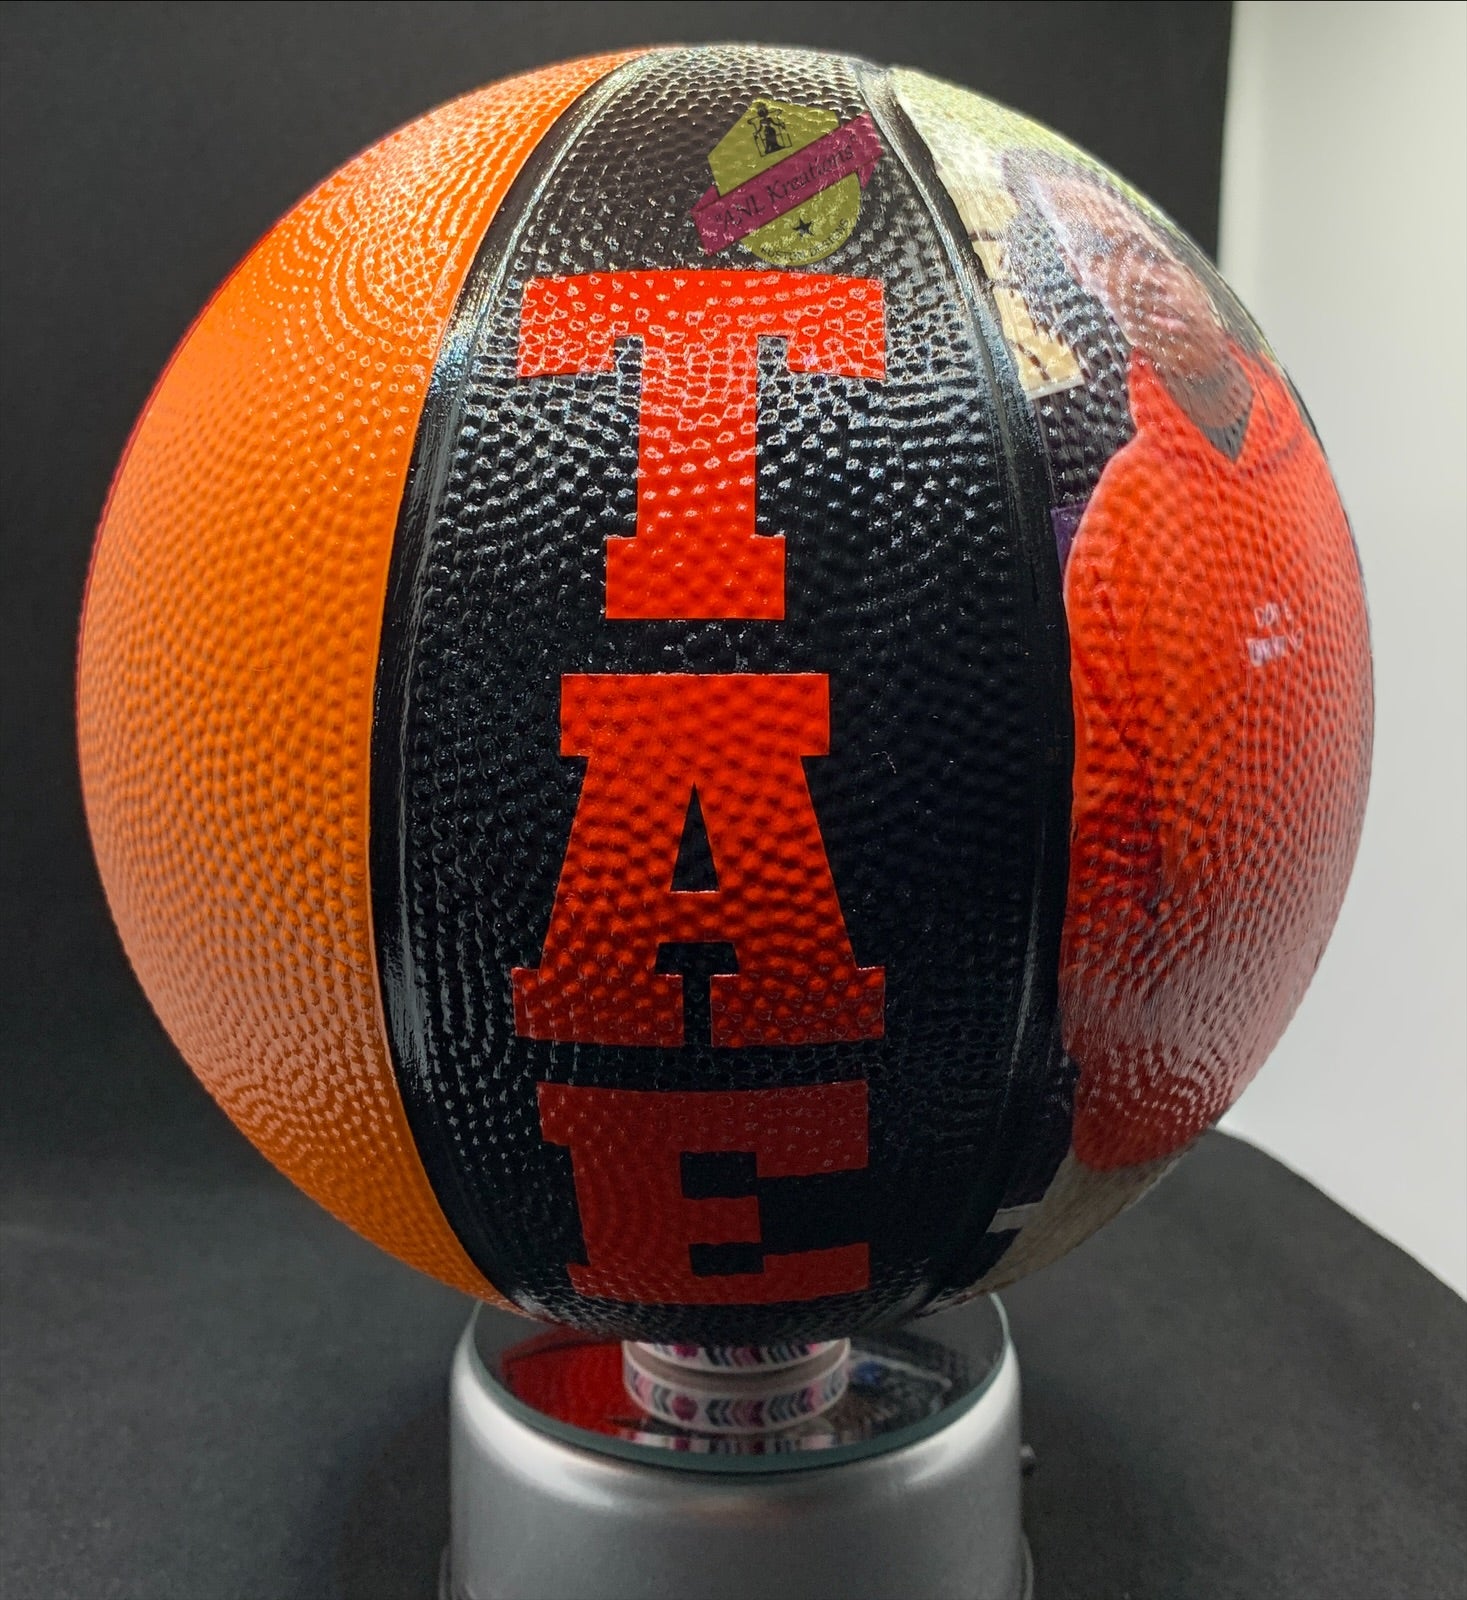 Customized Basketball (For Display Purposes Only)